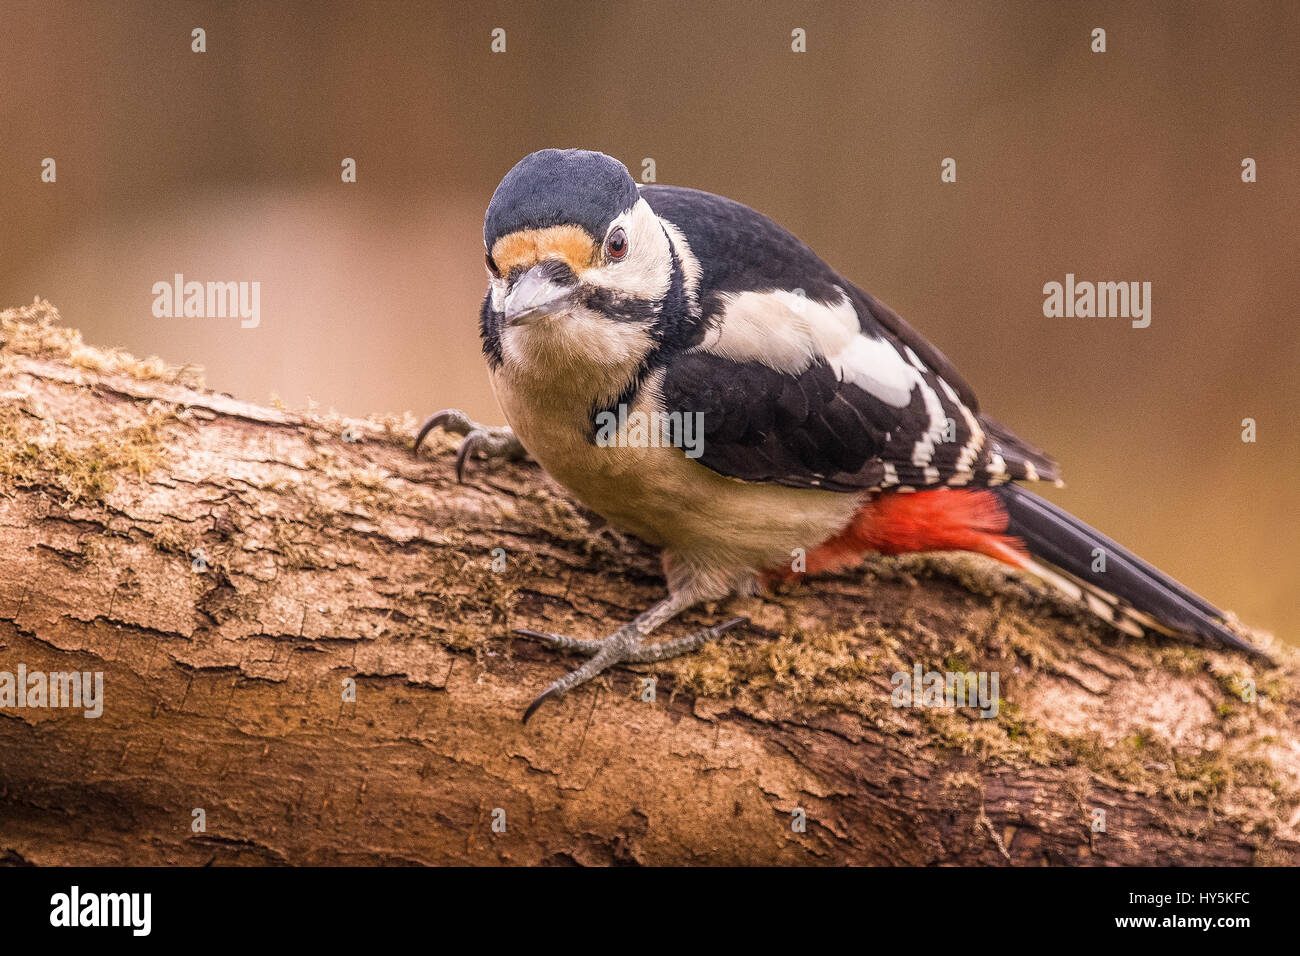 A Great Spotted Woodpecker perched on a tree Stock Photo